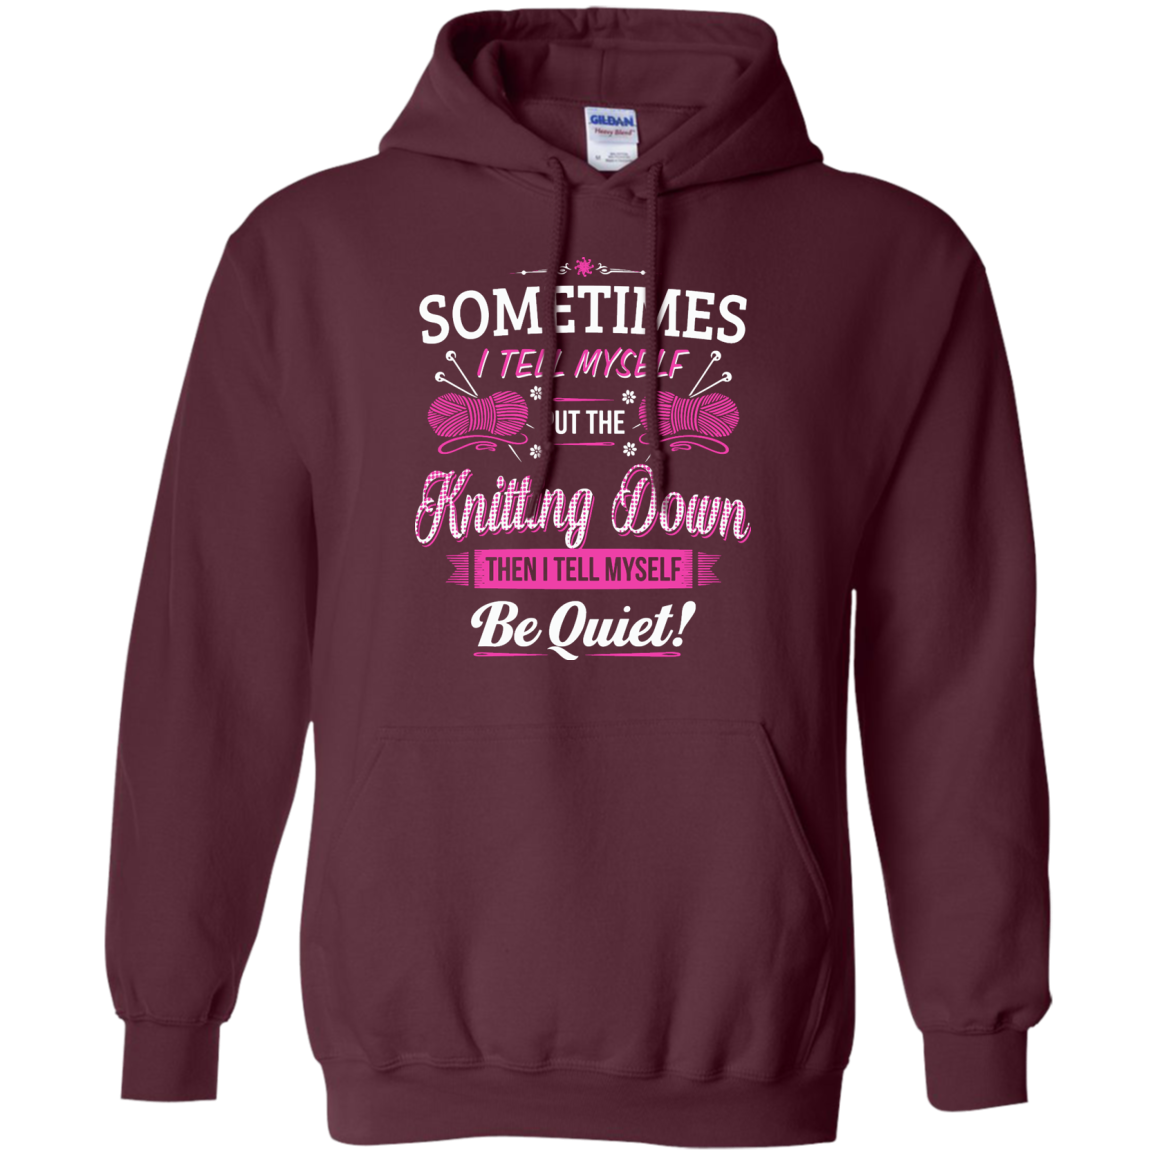 Put the Knitting Down Pullover Hoodies - Crafter4Life - 7